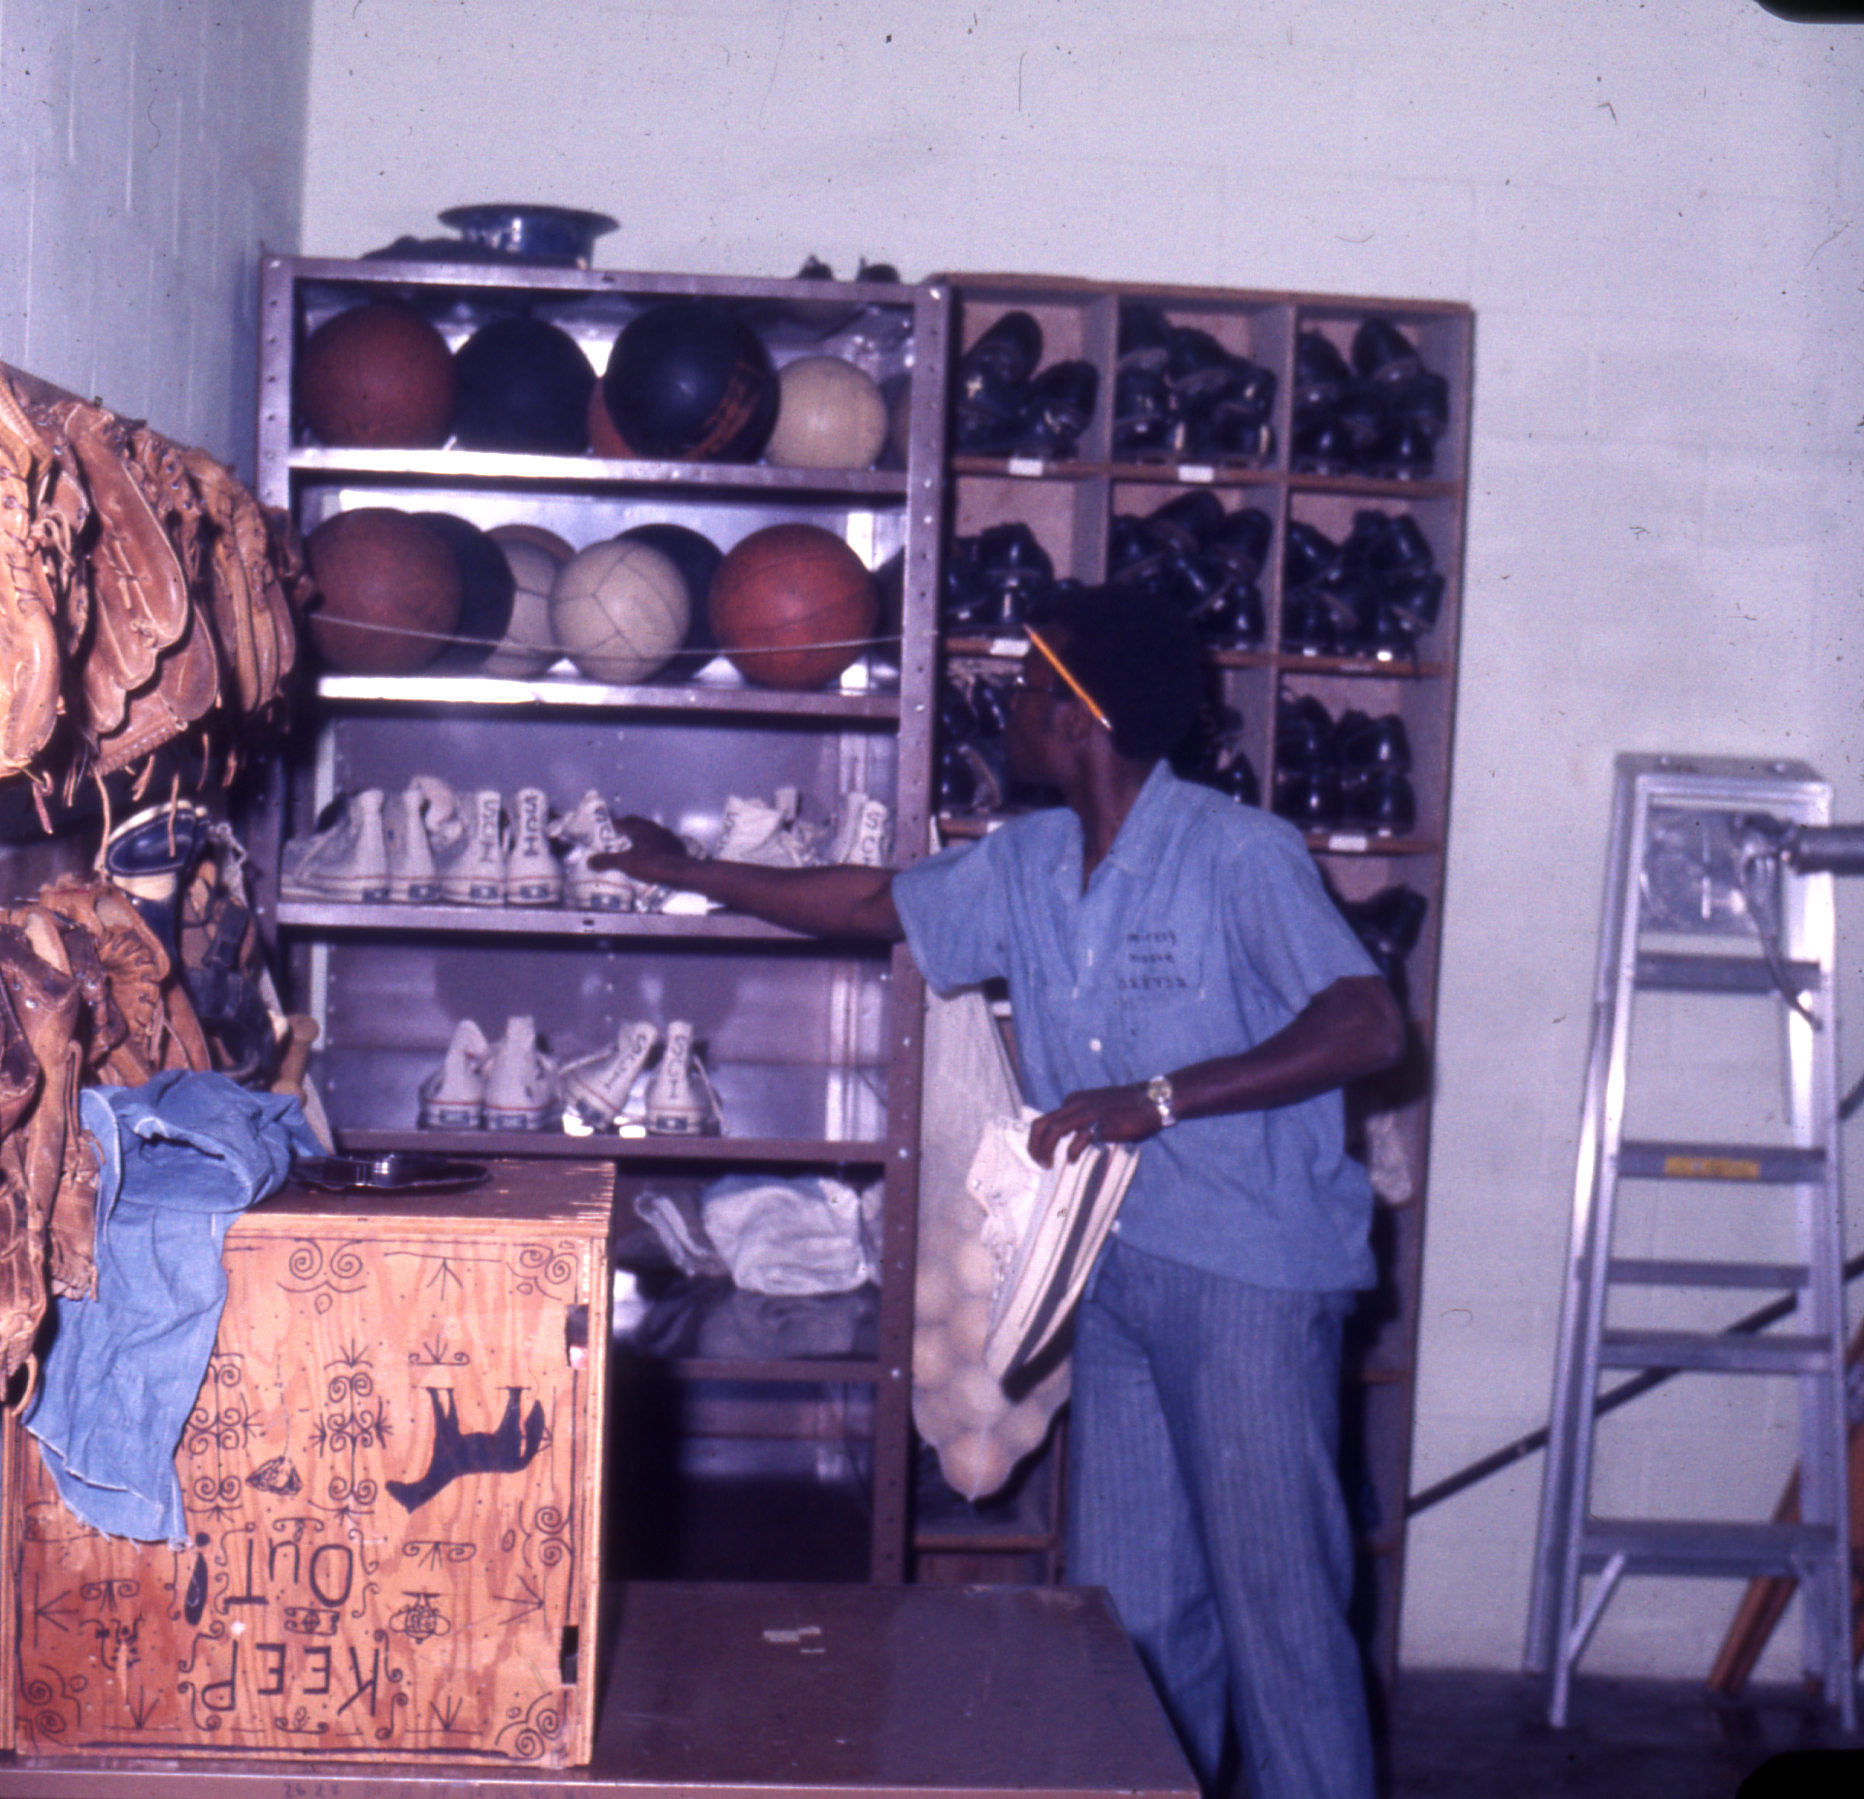 Slide 8: This is a photo of a Black man in a blue prison uniform. He appears to be working in an equipment room, and is surrounded by shelves of basketballs, sneakers, volleyballs, and baseball gloves.